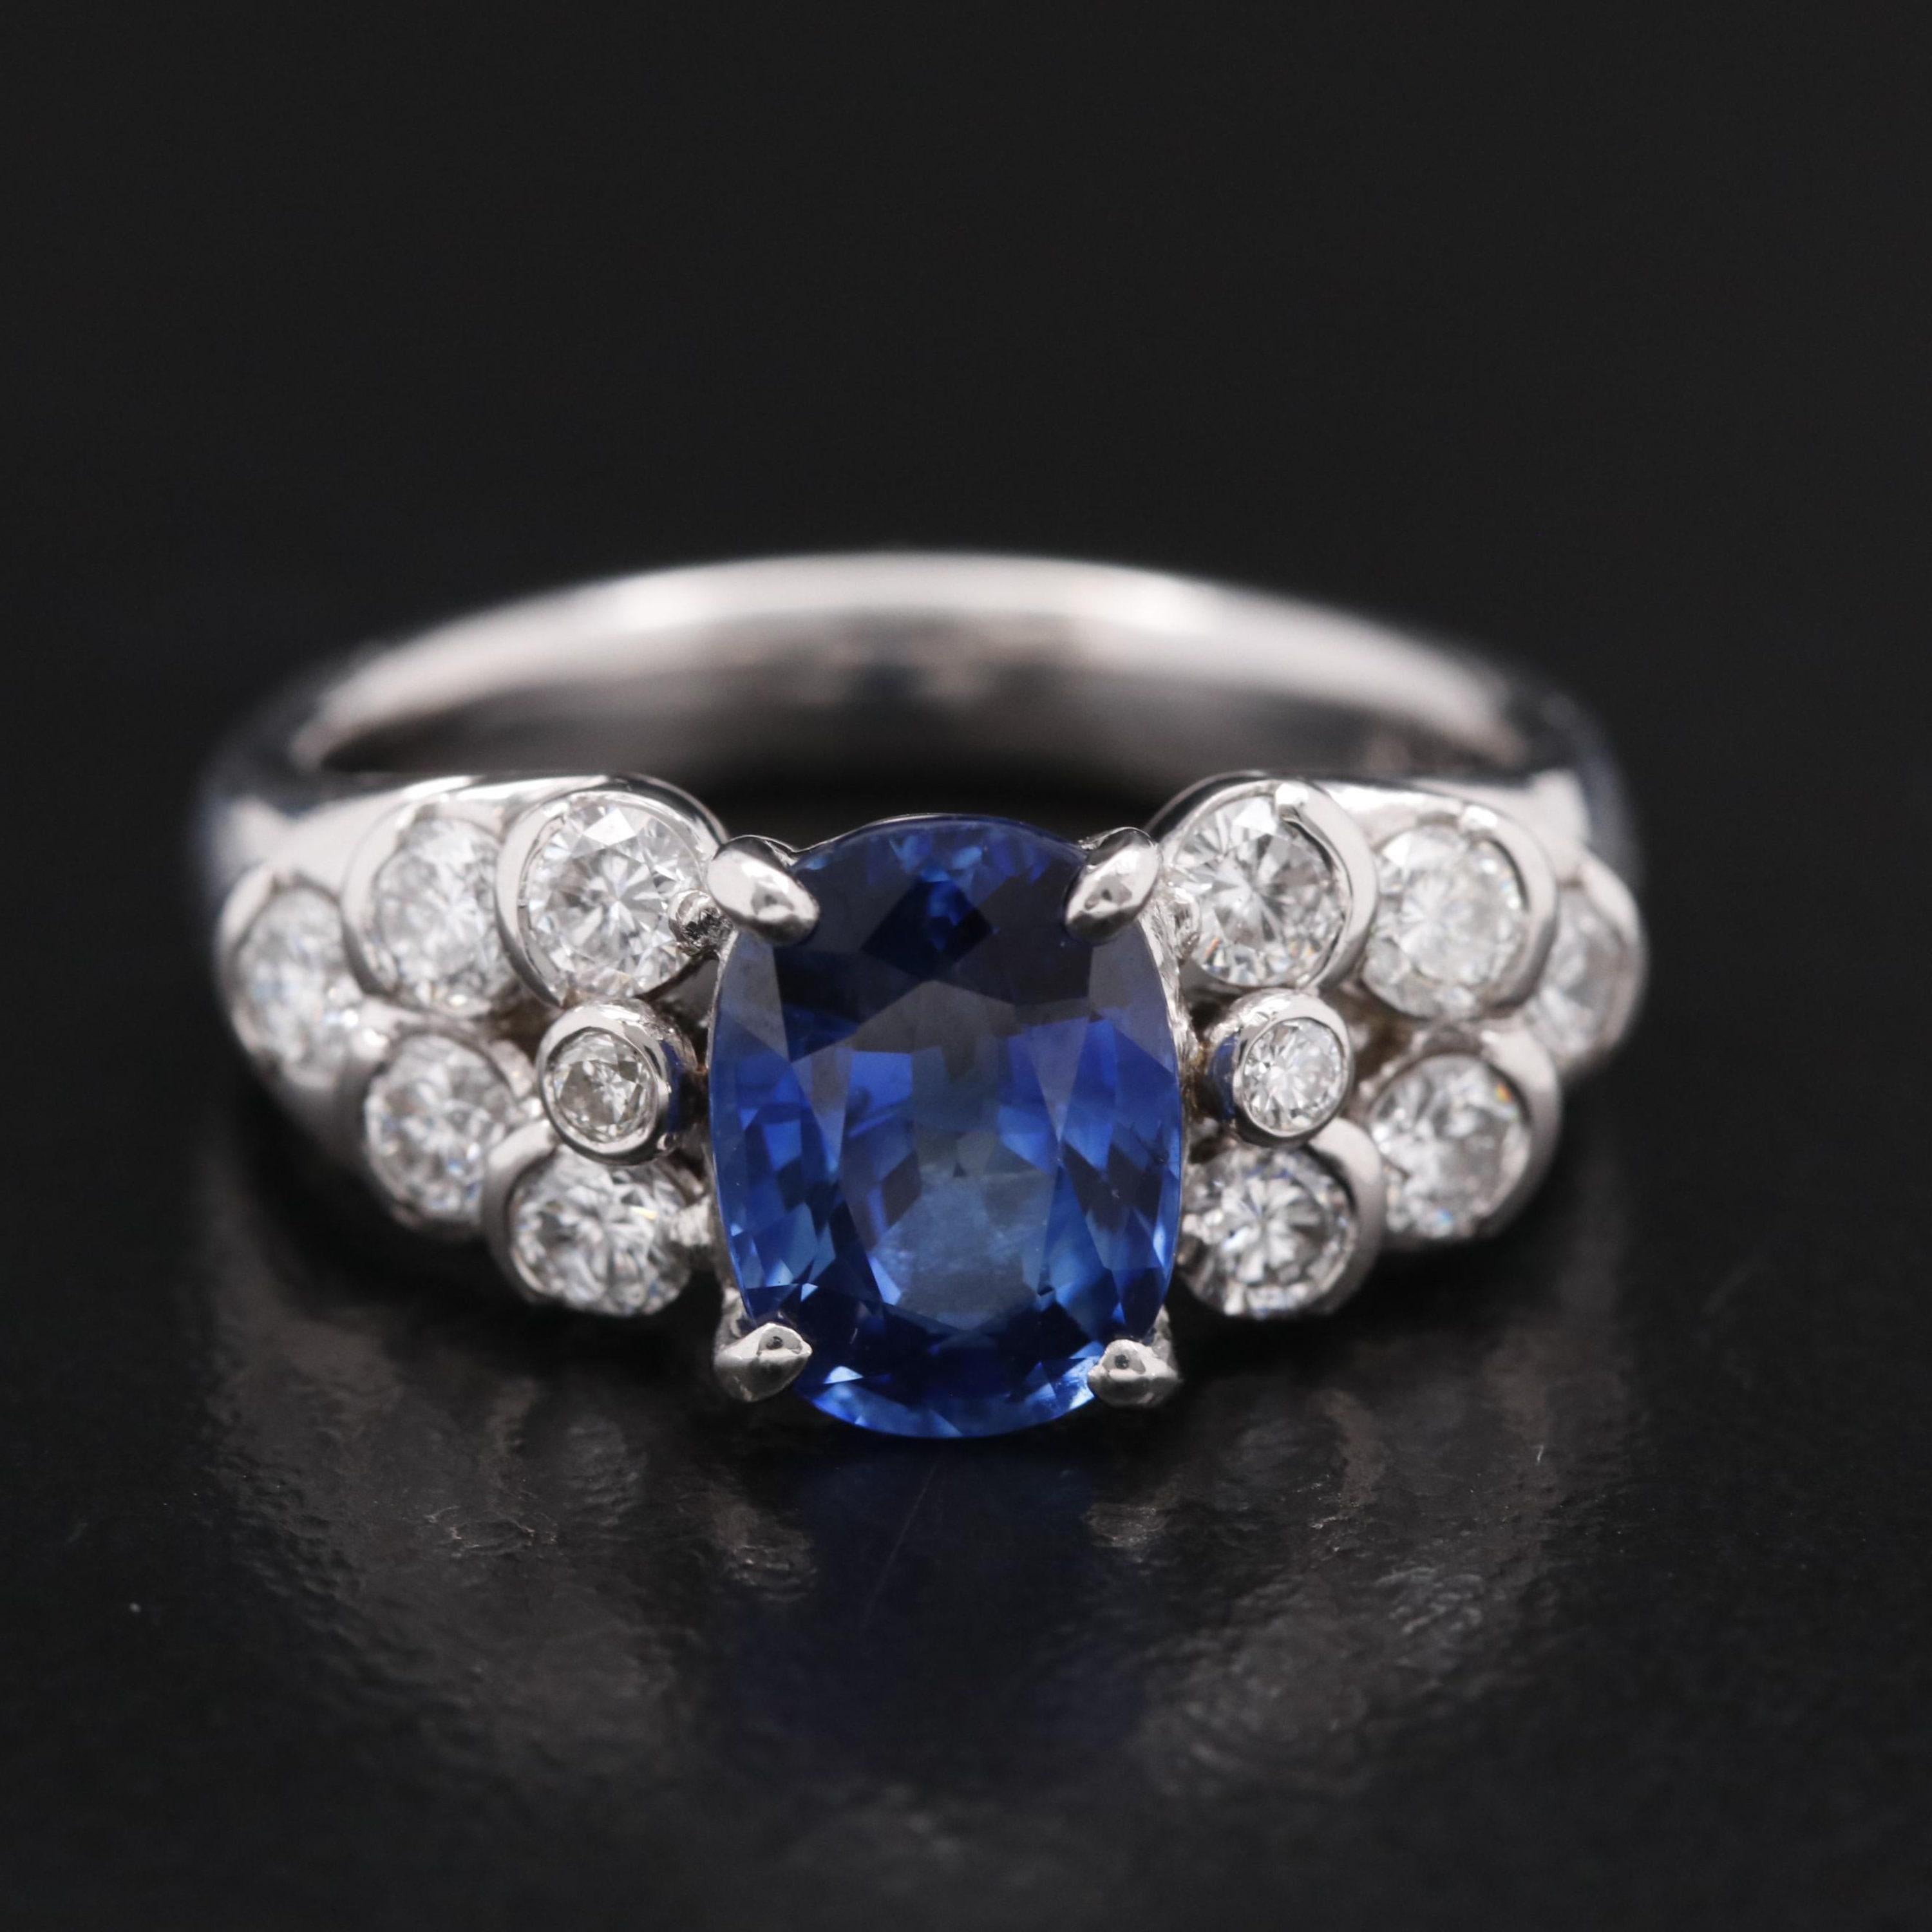 For Sale:  2.67 Carat Sapphire and Diamond White Gold Engagement Ring Bridal Statement Ring 5